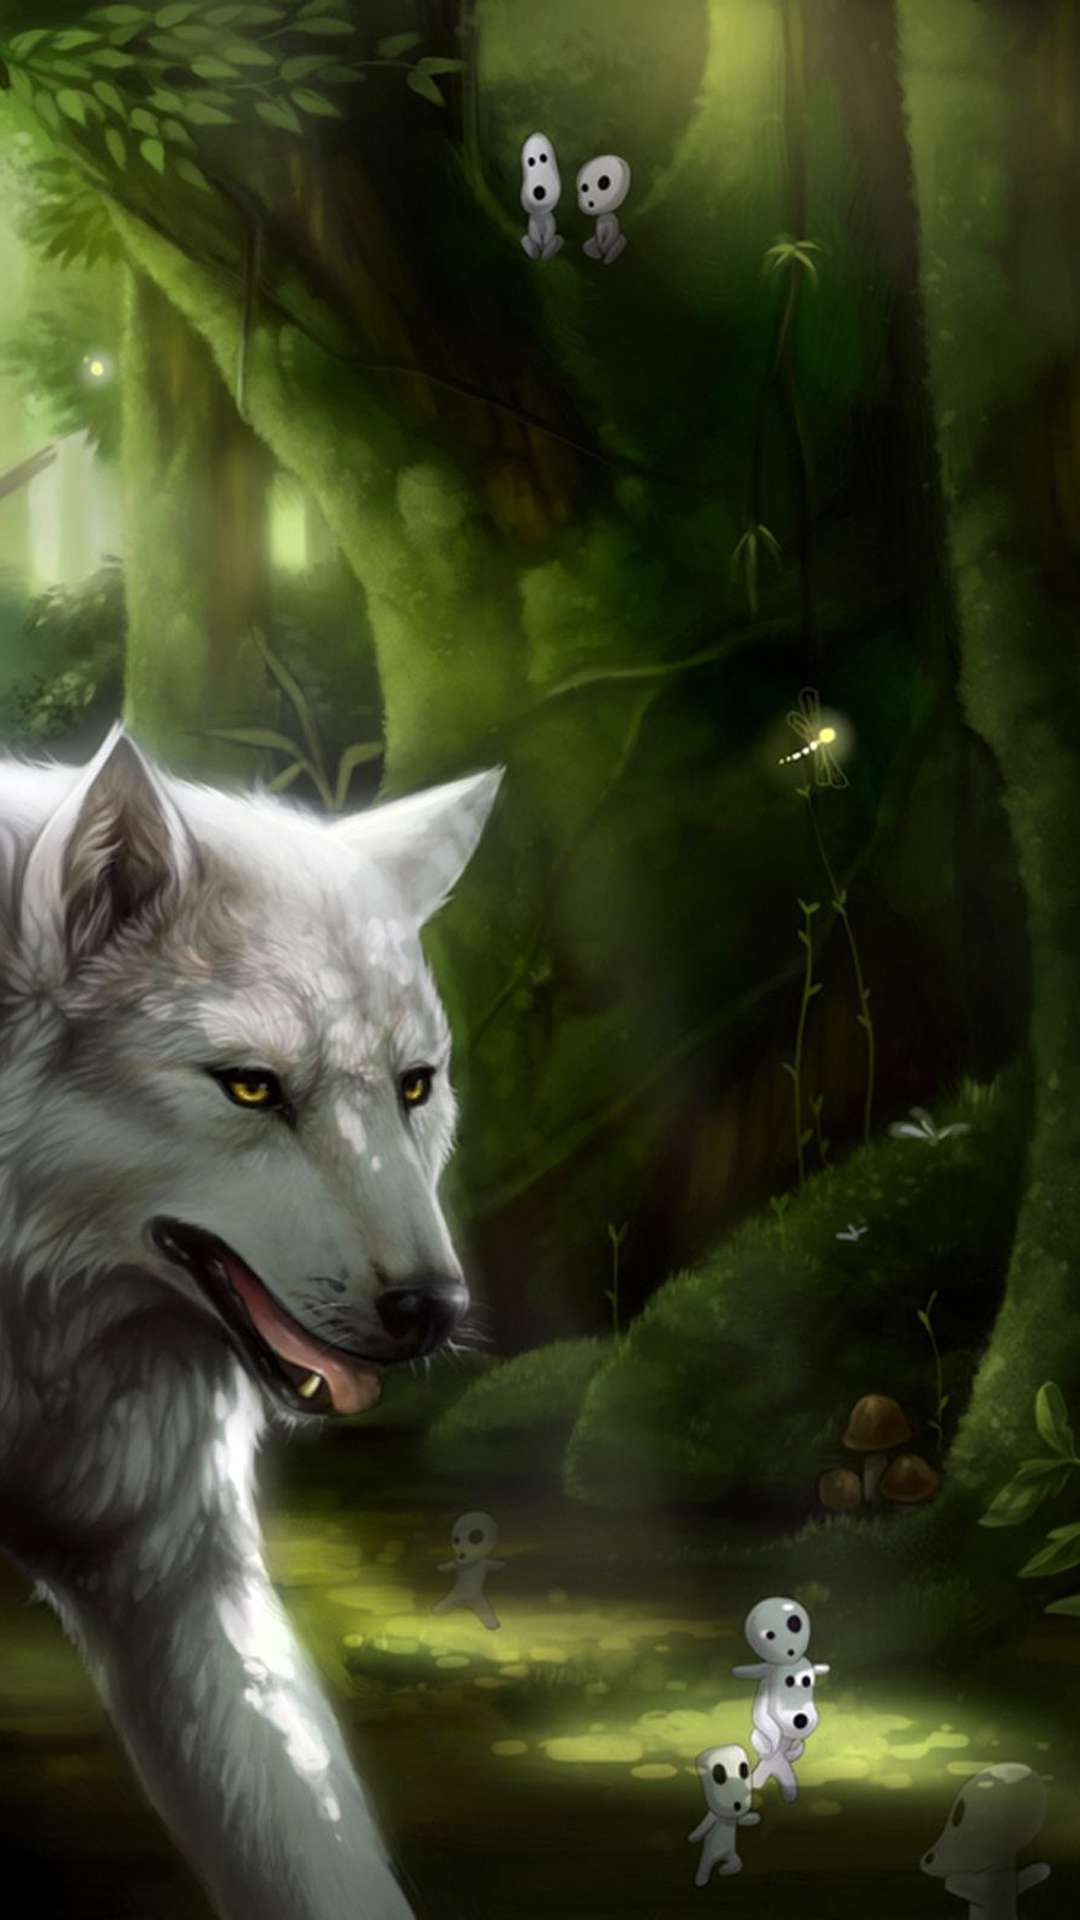 14+ Princess Mononoke Wallpapers for iPhone and Android by Brian Thornton